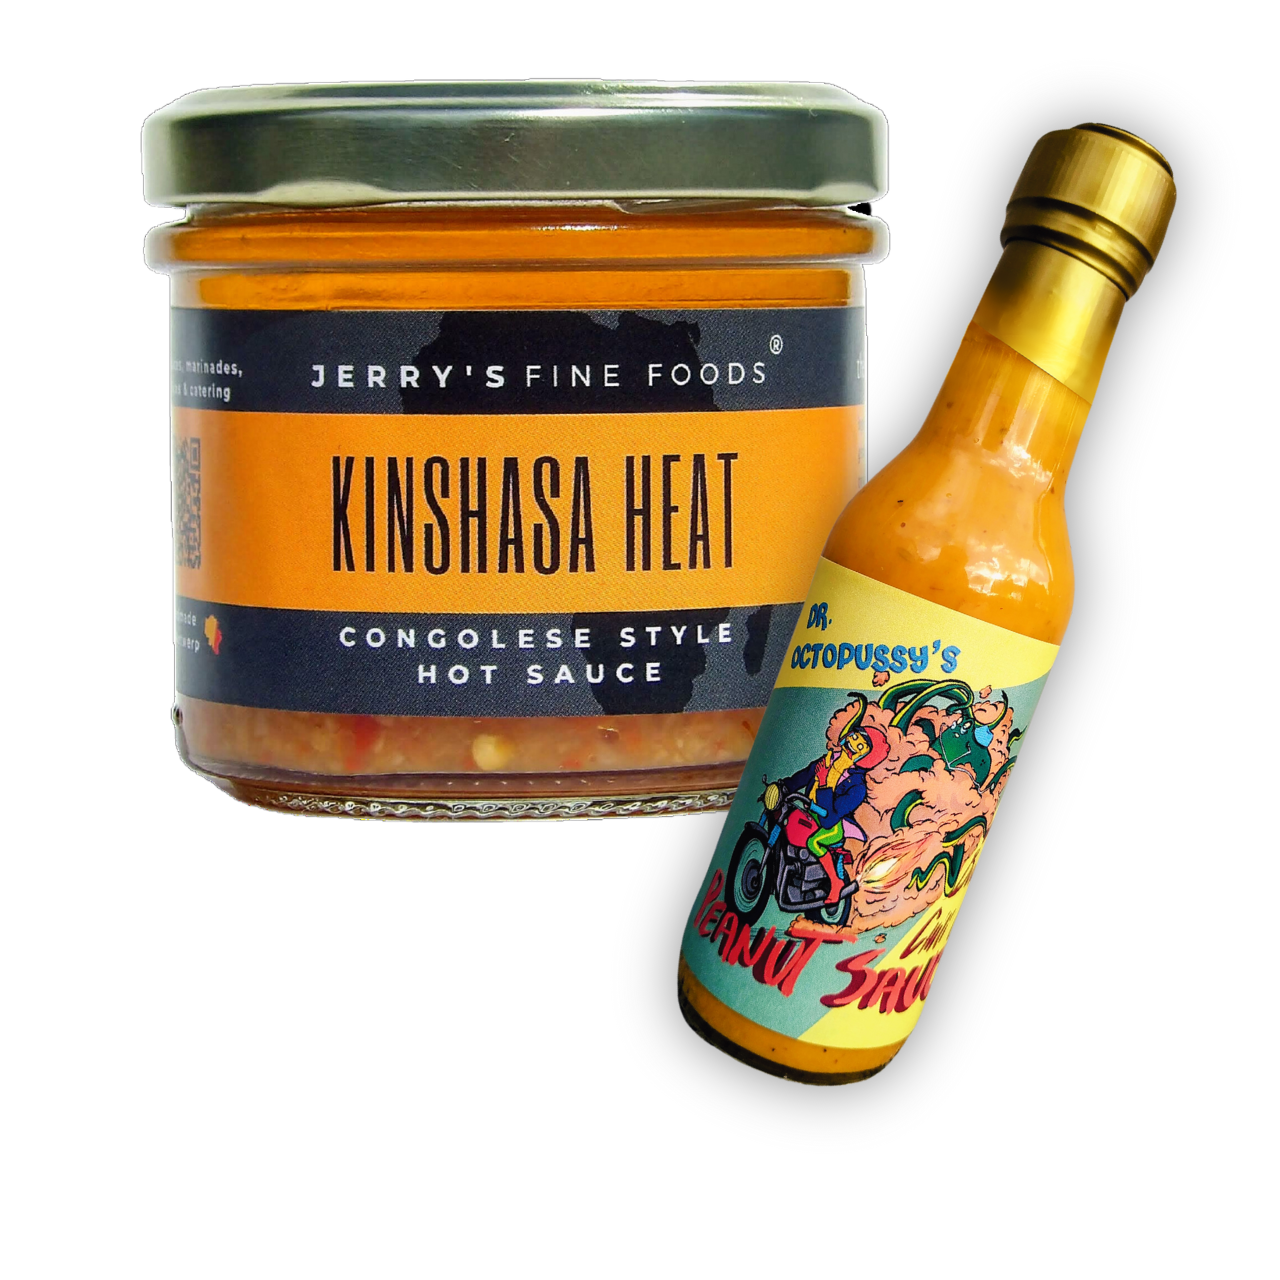 Kinshasa Heat and Dr. Octopussy's smoking burnout chili lime peanut sauce